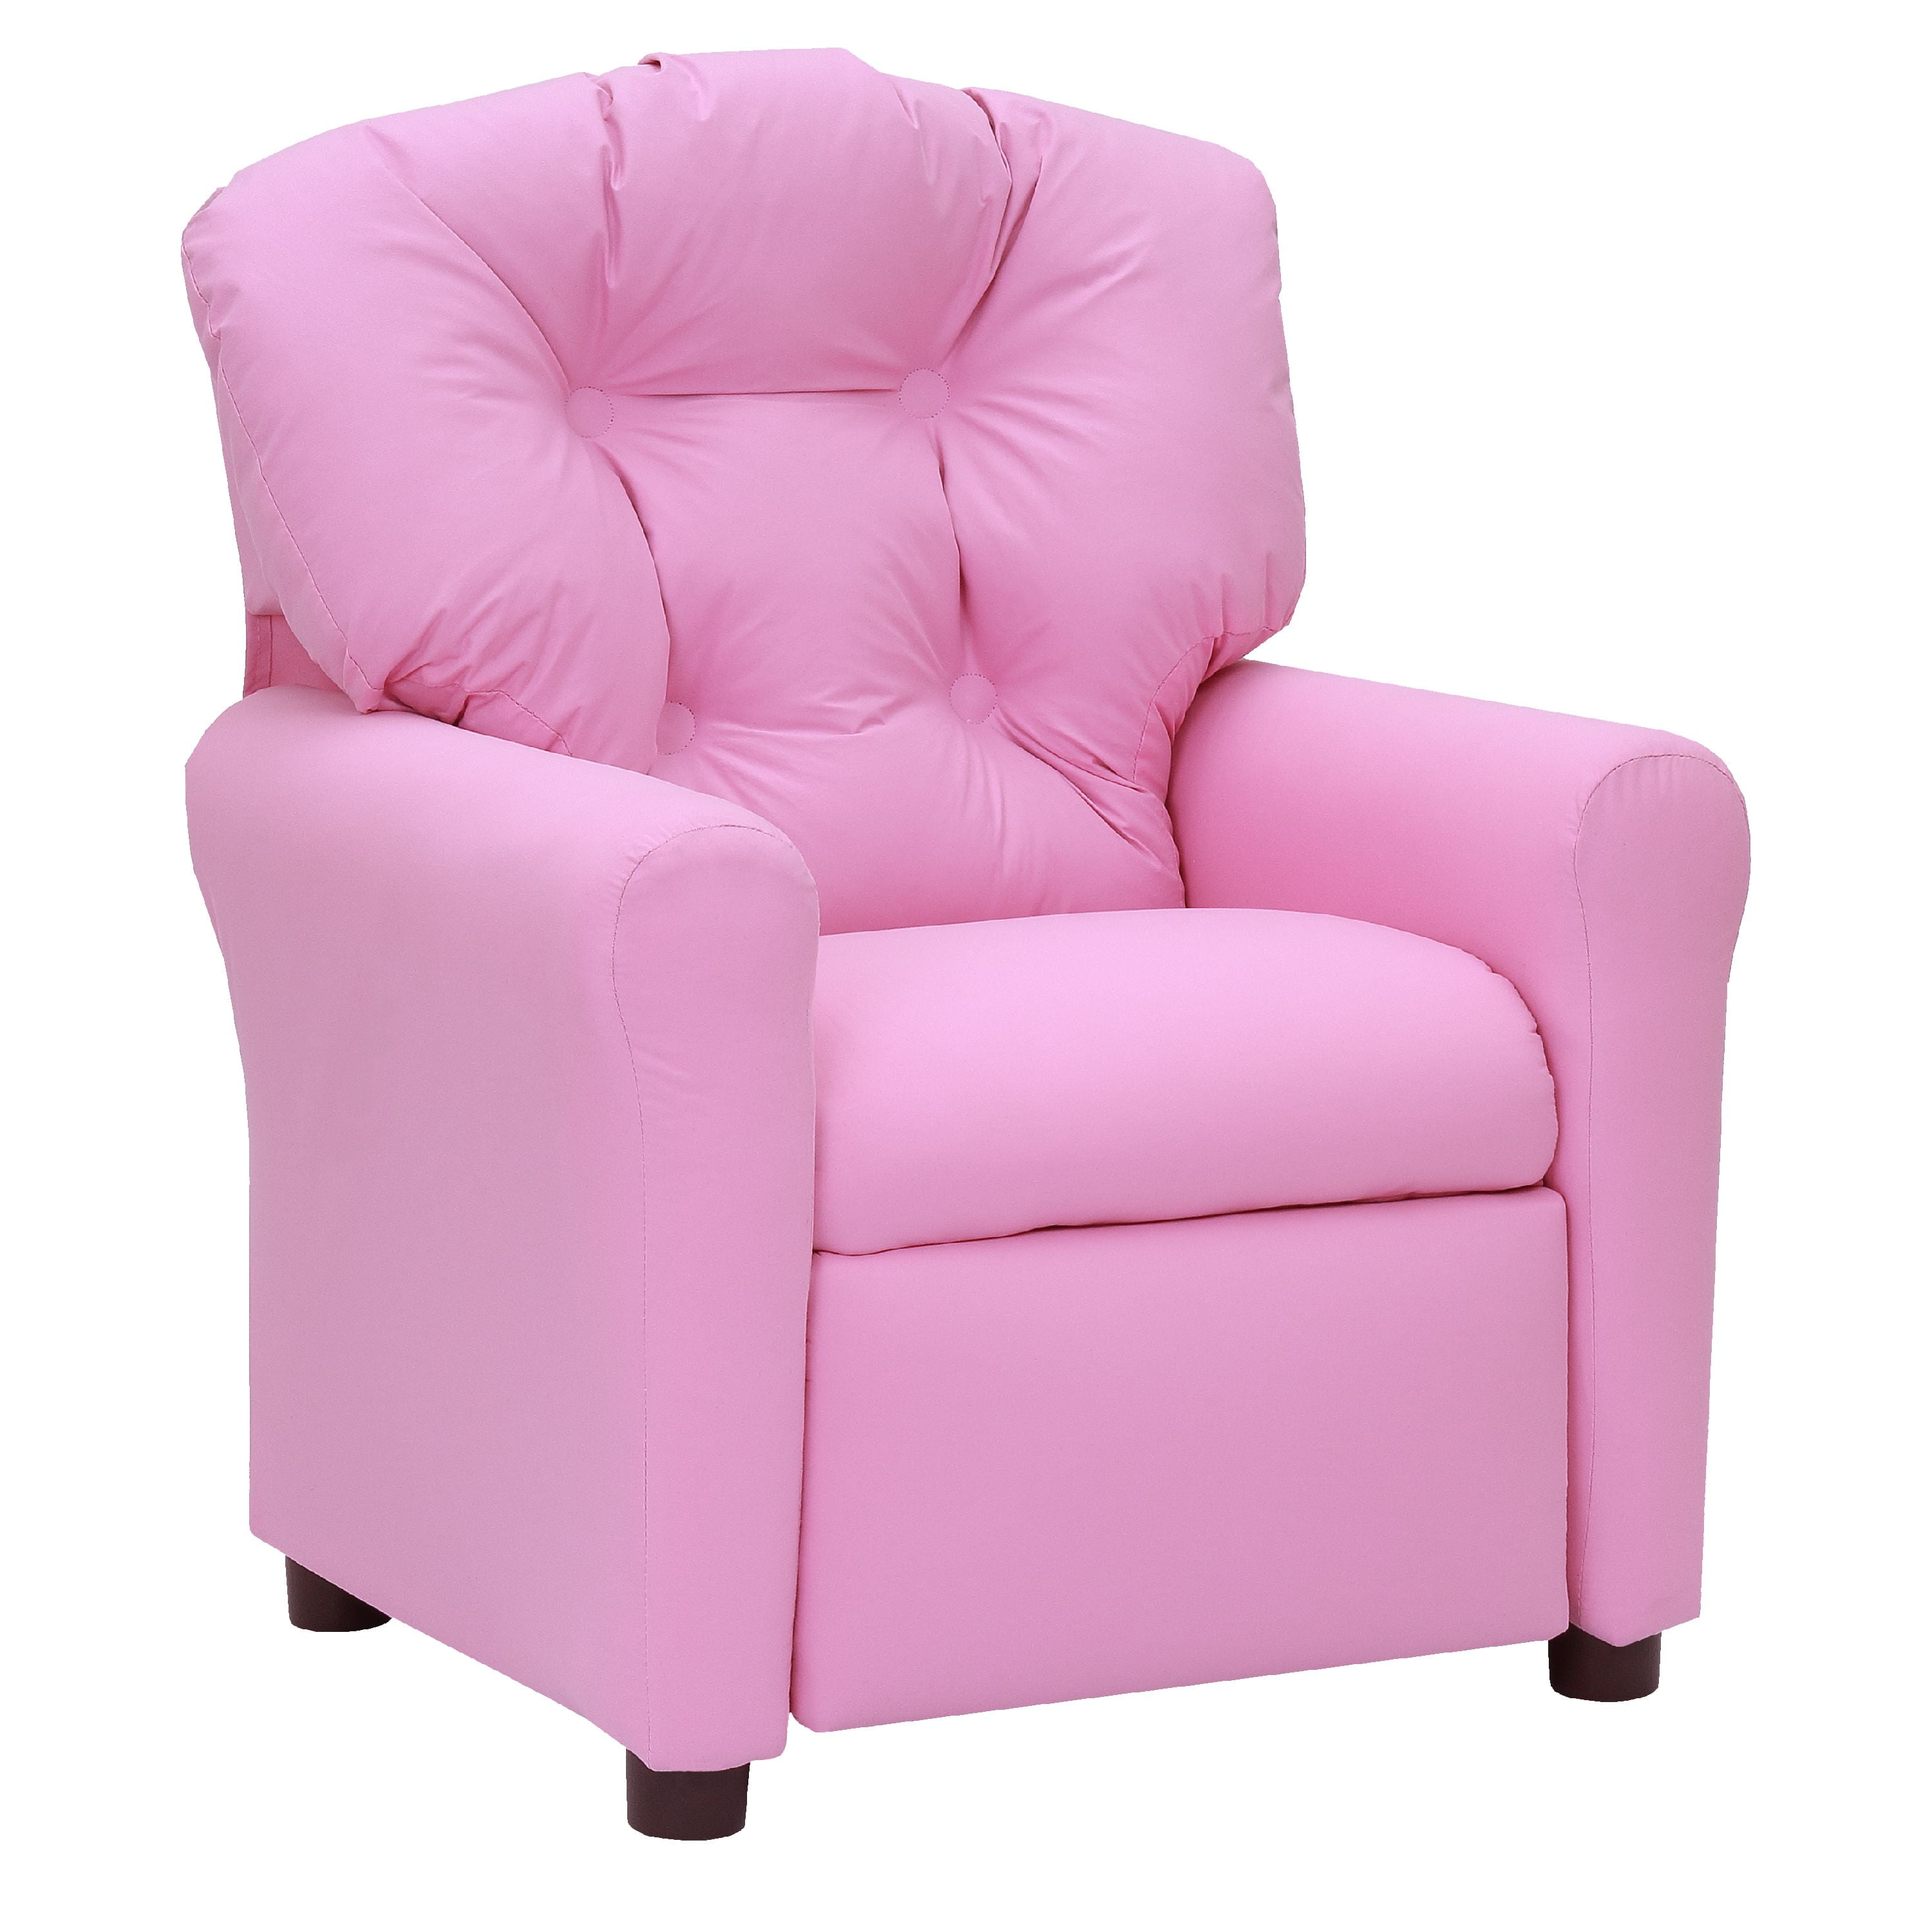 Walmart Child Recliner Off 76 Online Shopping Site For Fashion Lifestyle